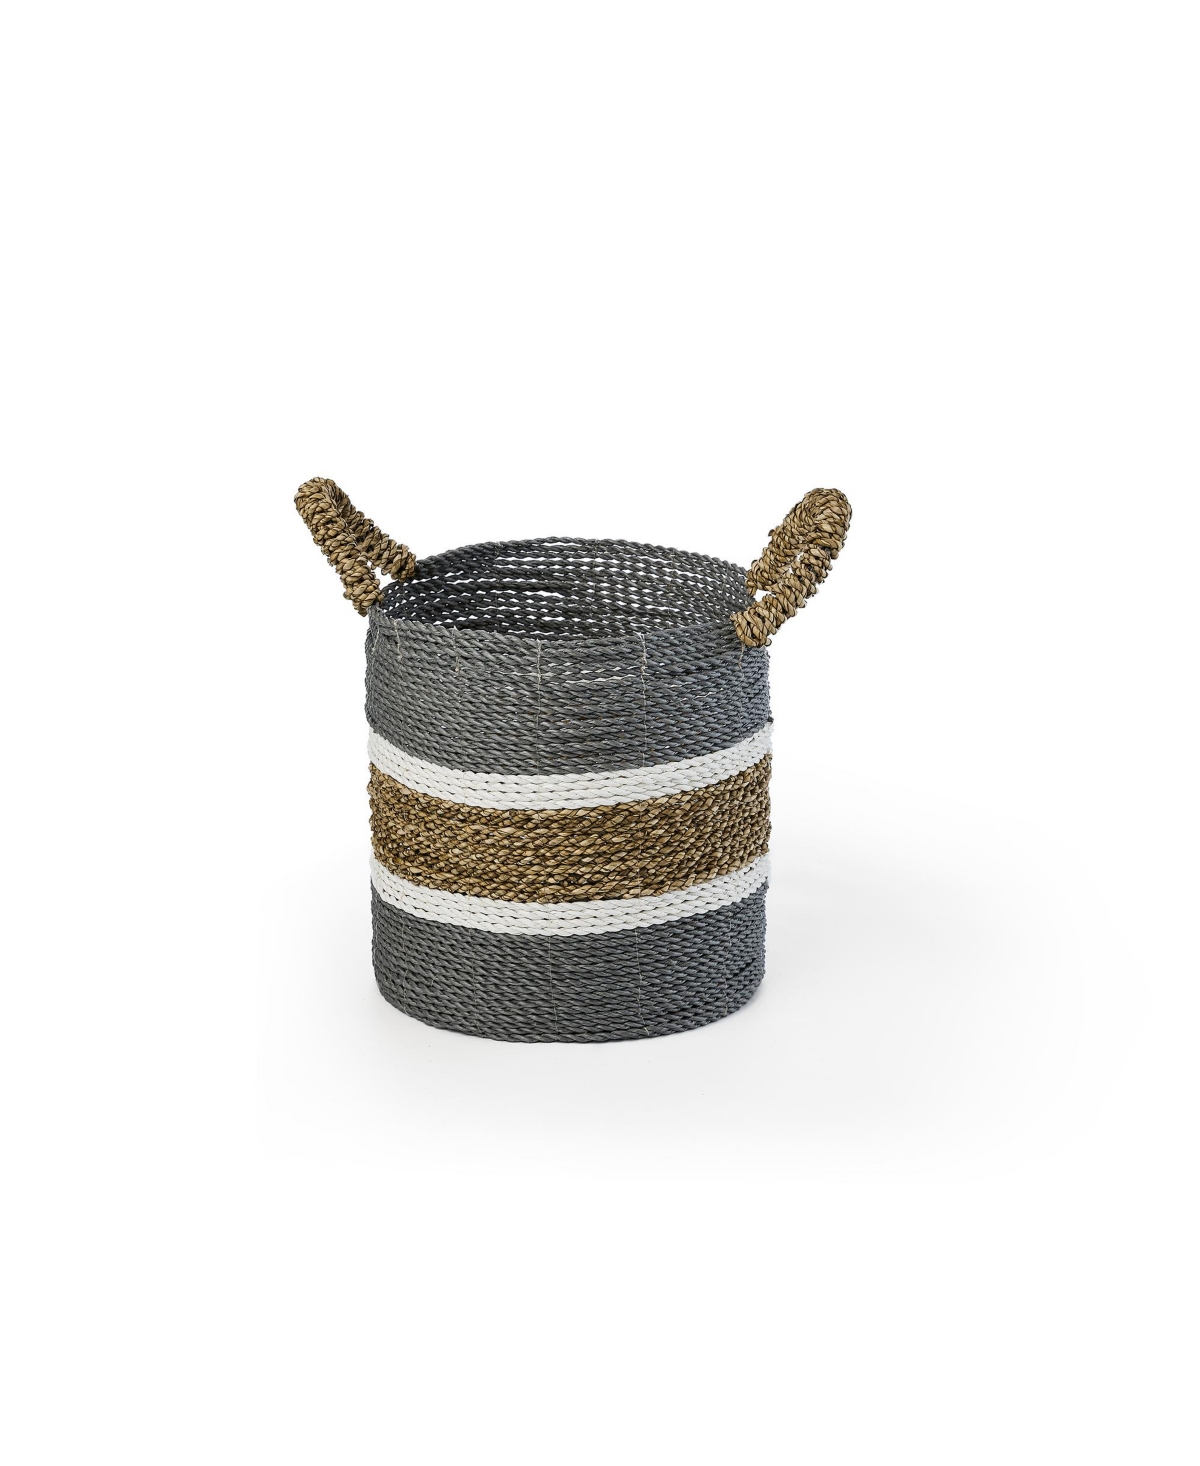 Shop Baum 3 Piece Round Sea Grass And Raffia Basket Set With Ear Handles In Gray And Tan